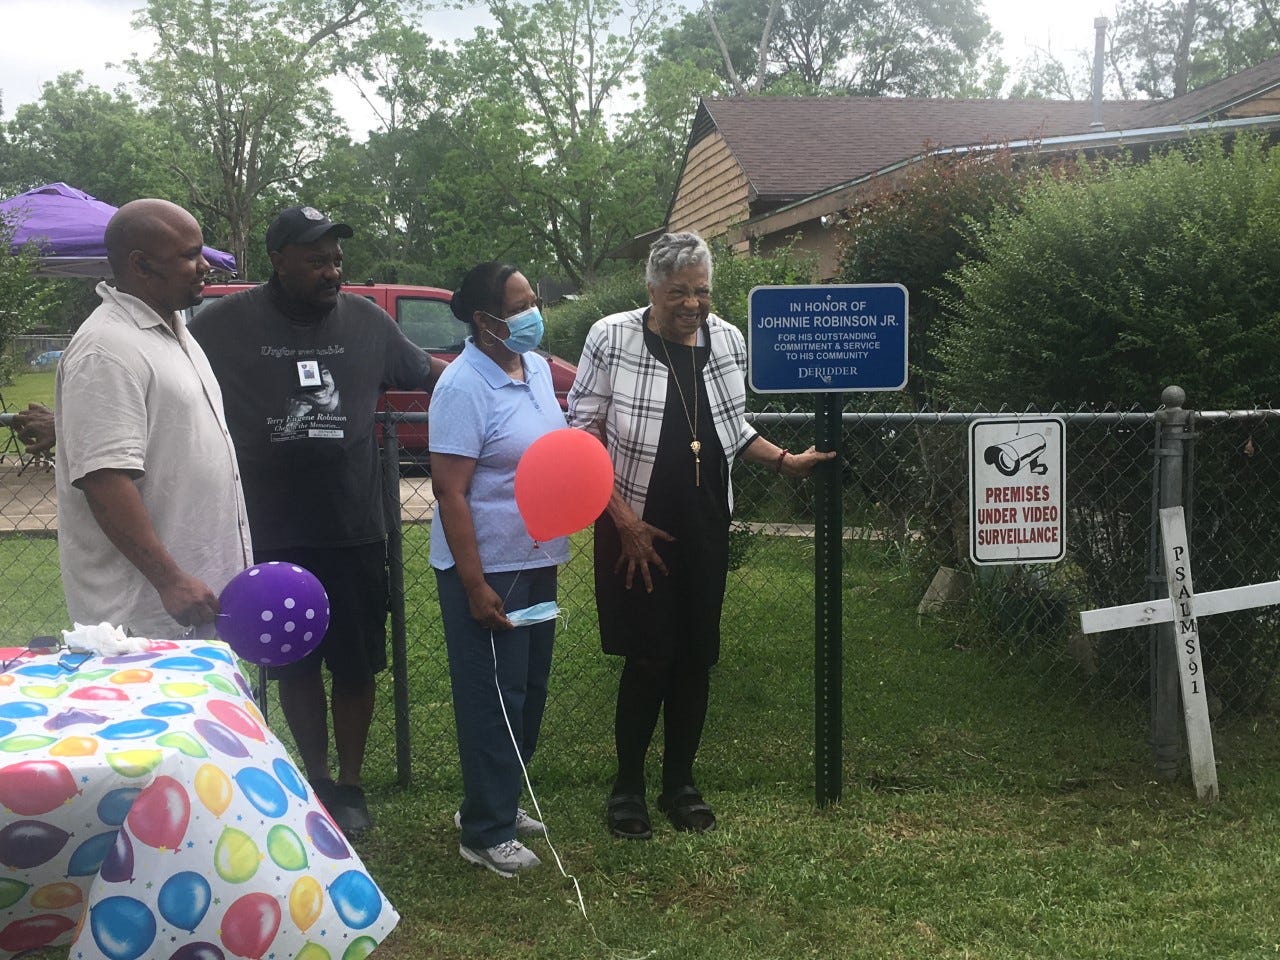 Louella Robinson, wife of the late Johnnie Robinson, was surrounded by family, friends, and many community leaders at the unveiling ceremony.